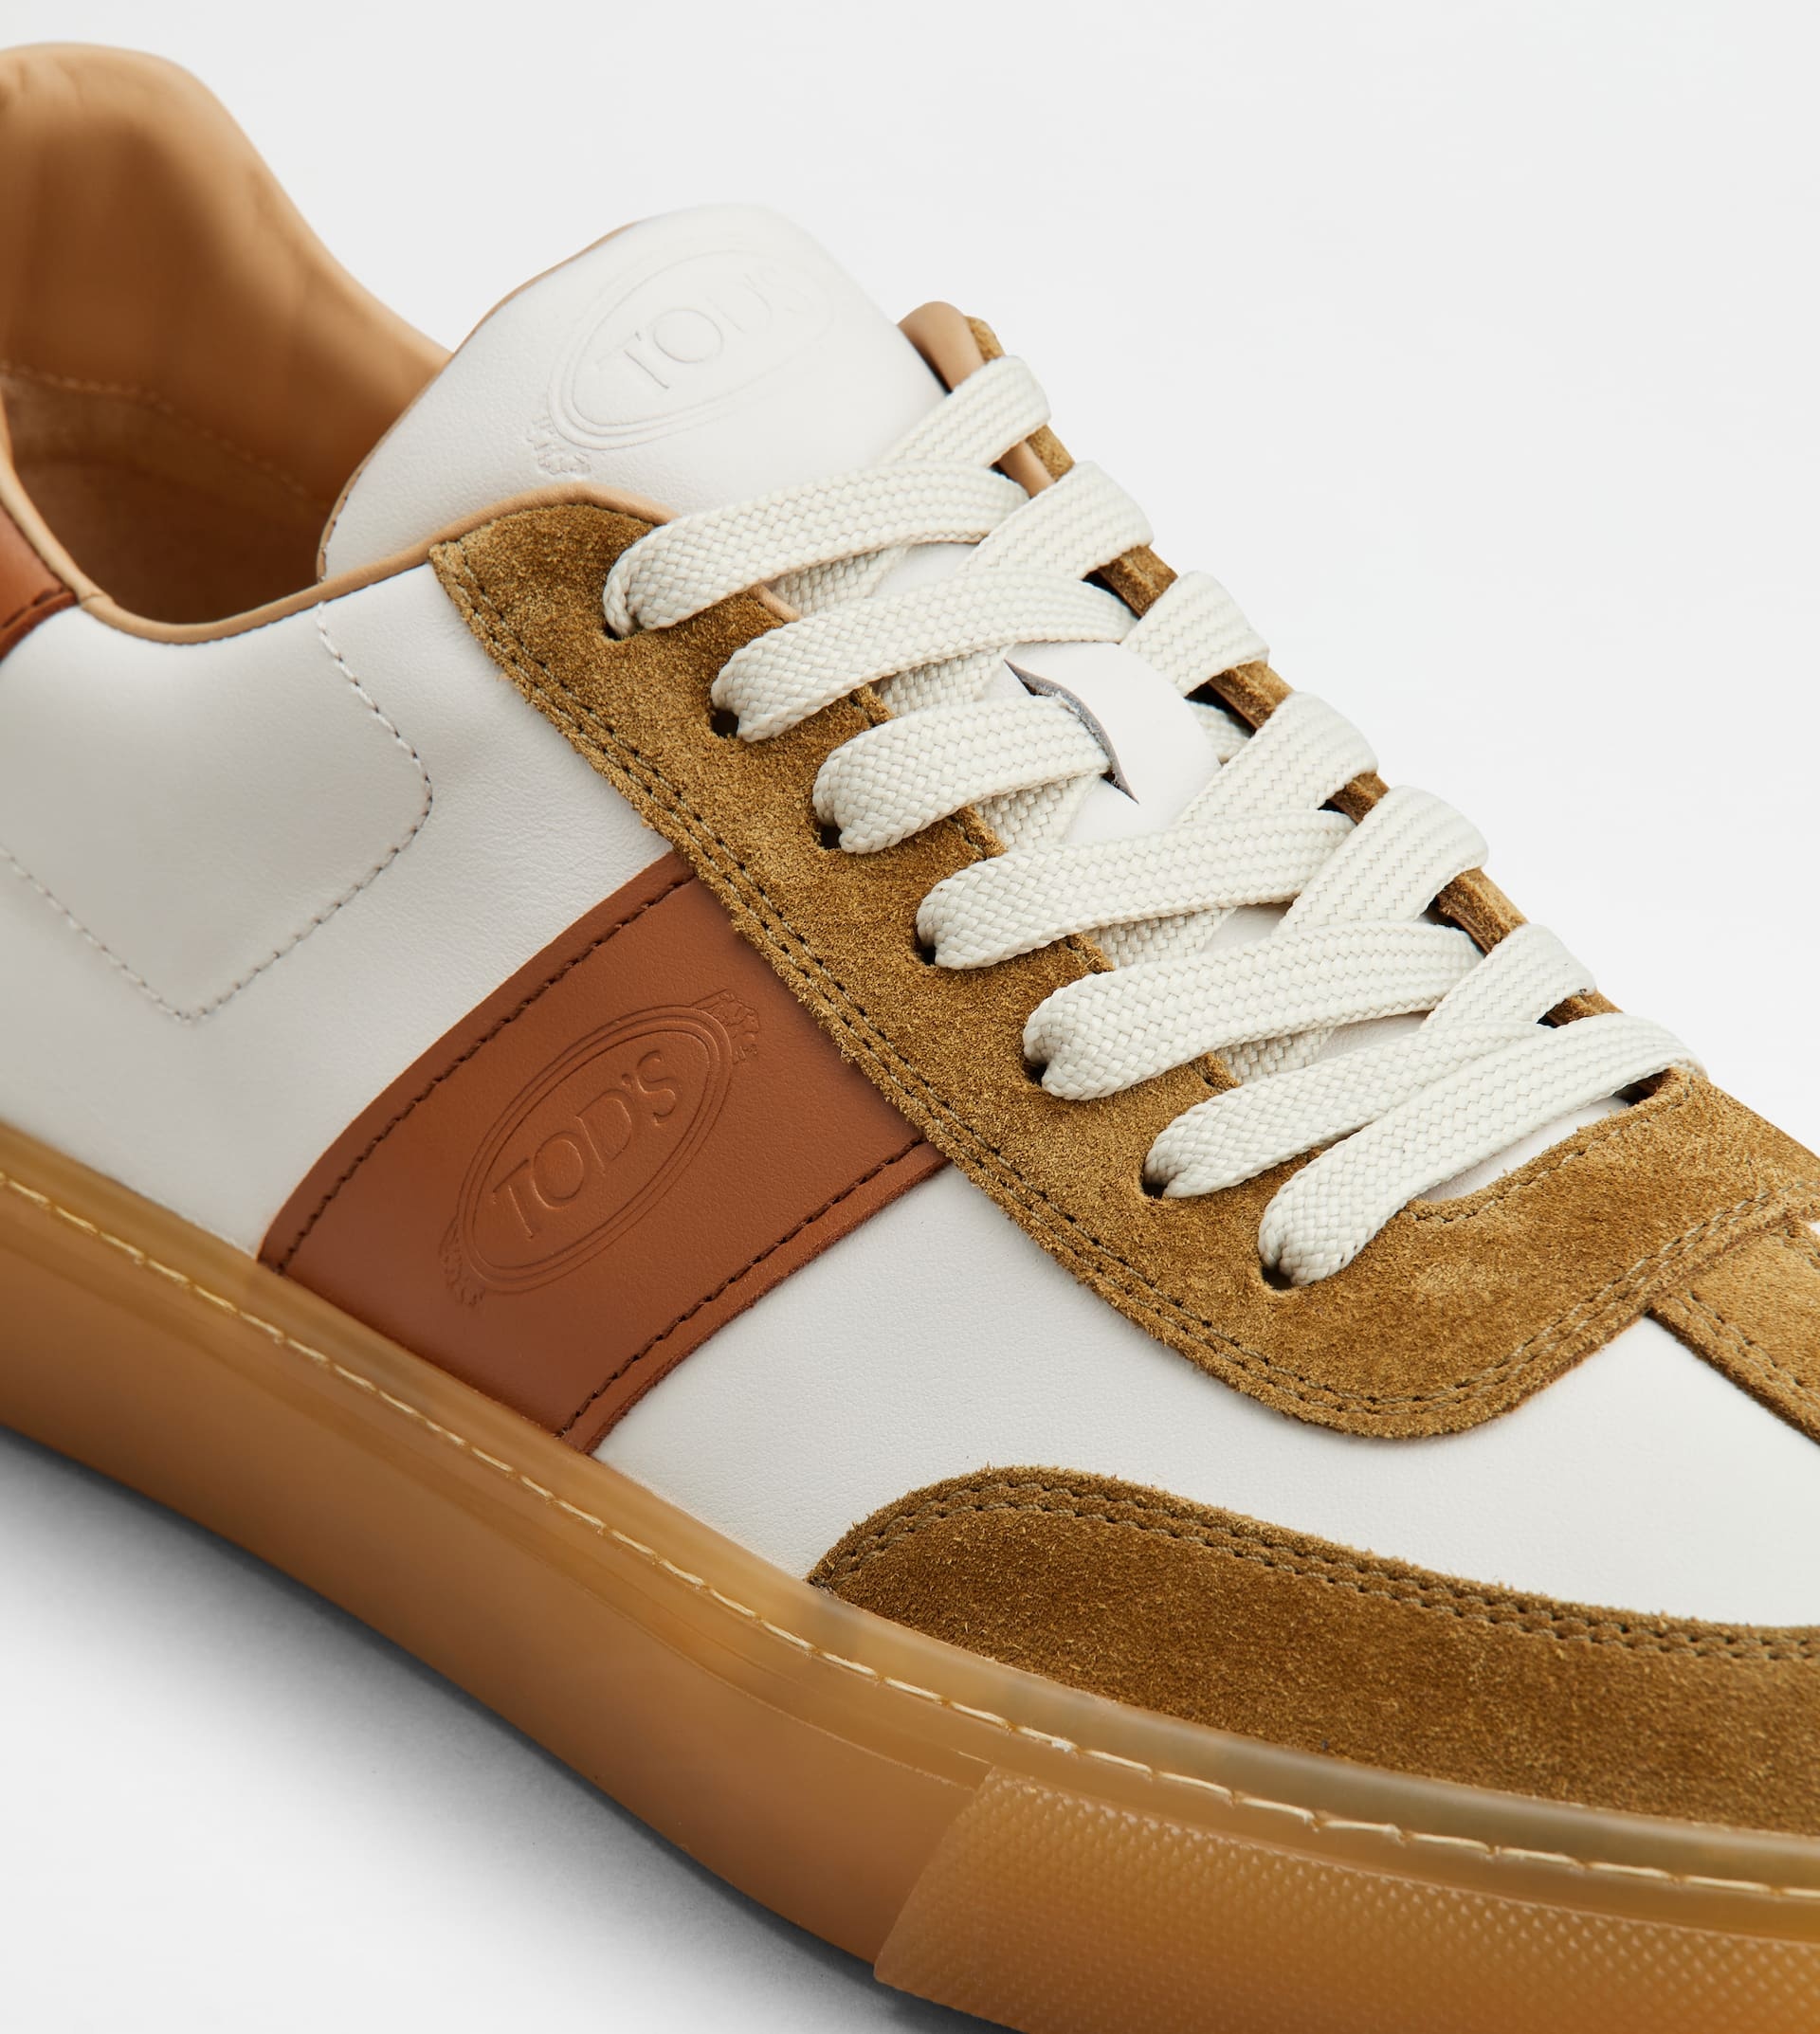 SNEAKERS IN LEATHER - WHITE, BROWN, PINK - 5